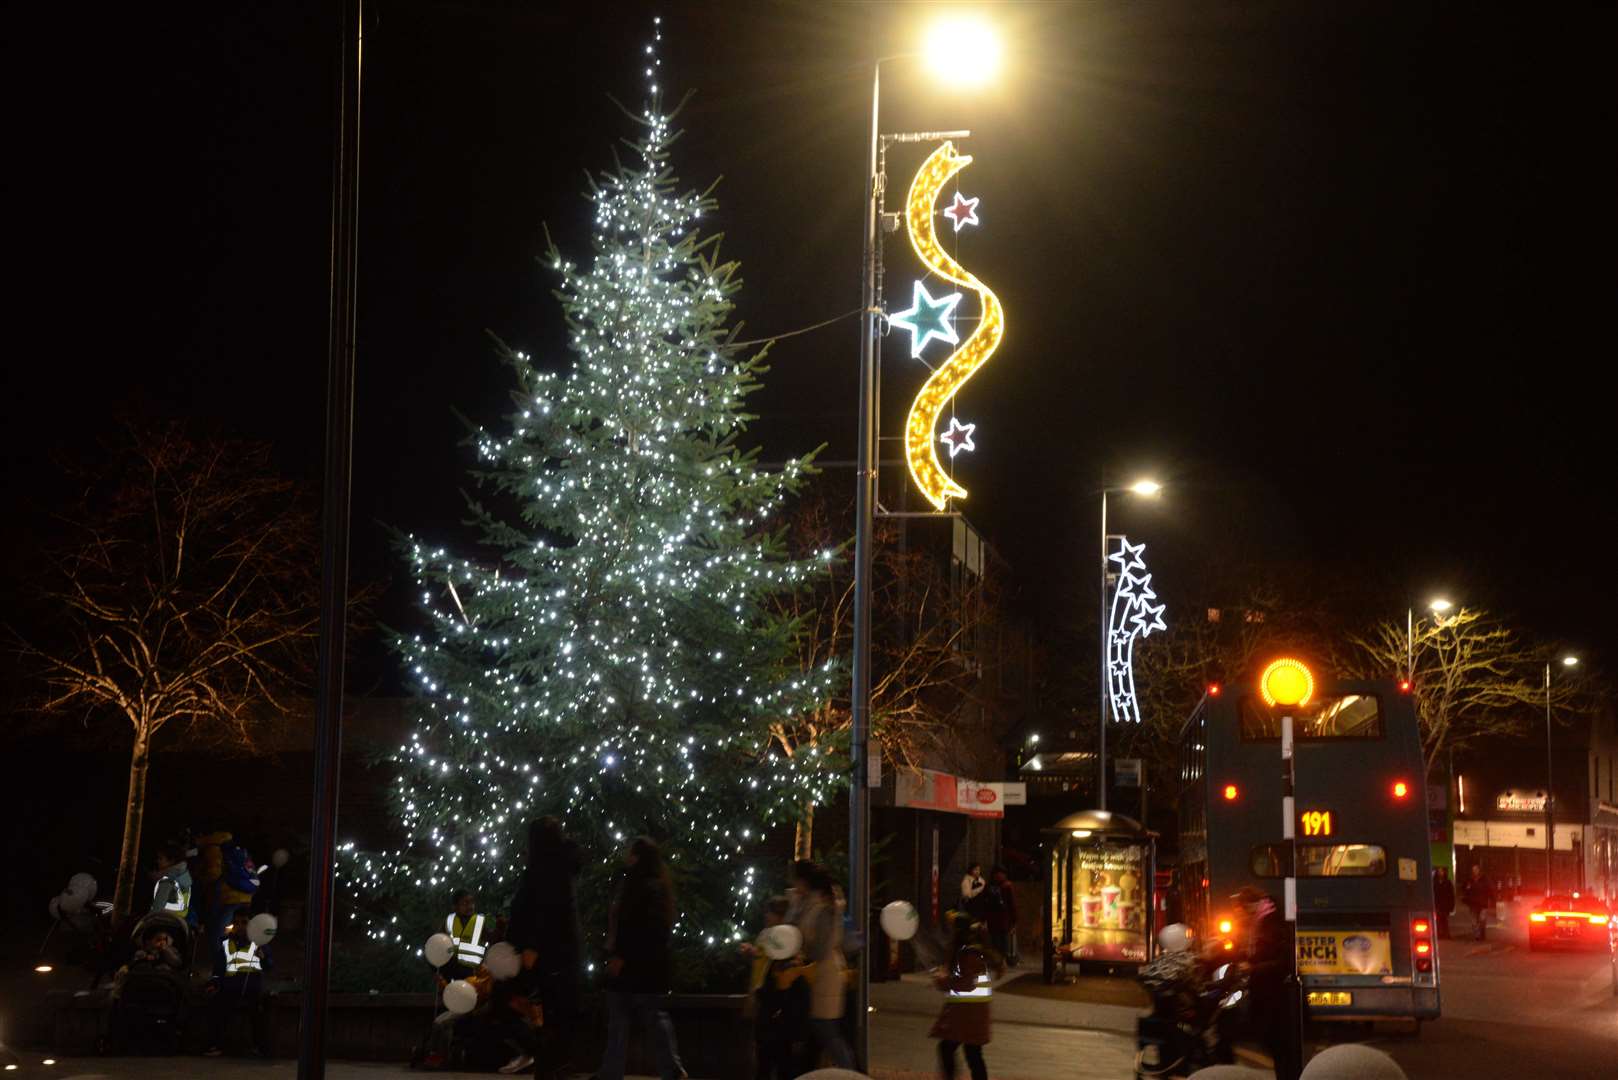 The Christmas Lights in Strood. Picture: Chris Davey